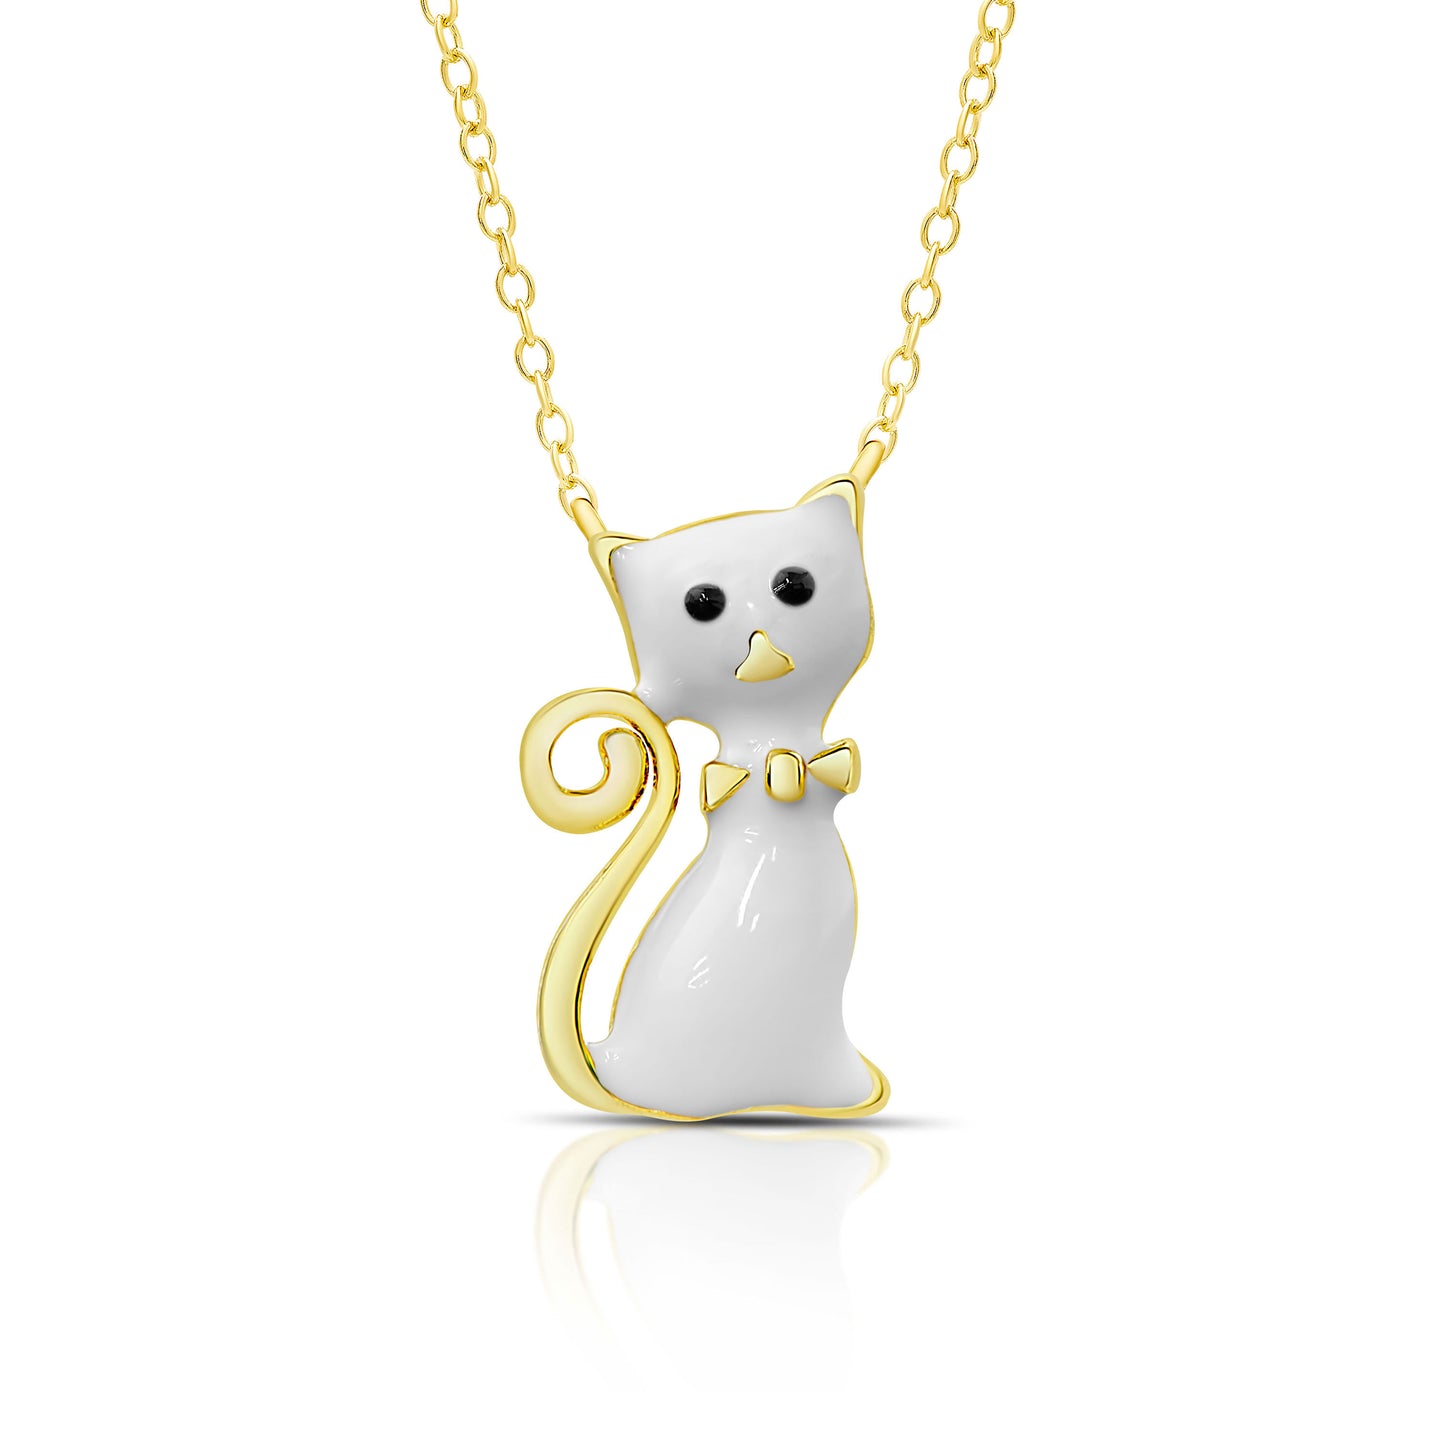 Lily Nily Cat Pendant